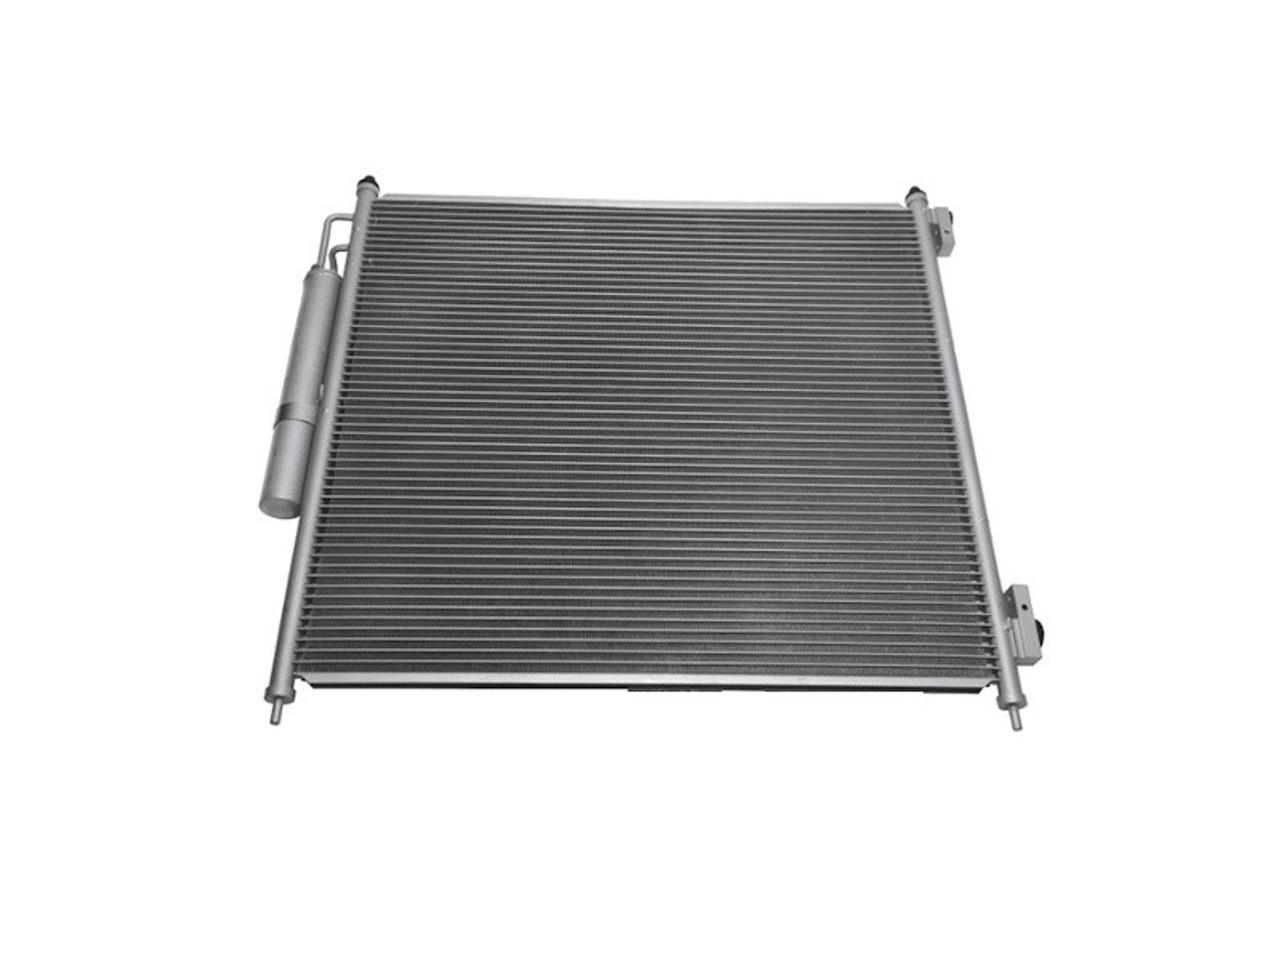 Eurospare New Defender and Discovery 5 Petrol AJ20P6 Air Conditioning Condenser - LR137975